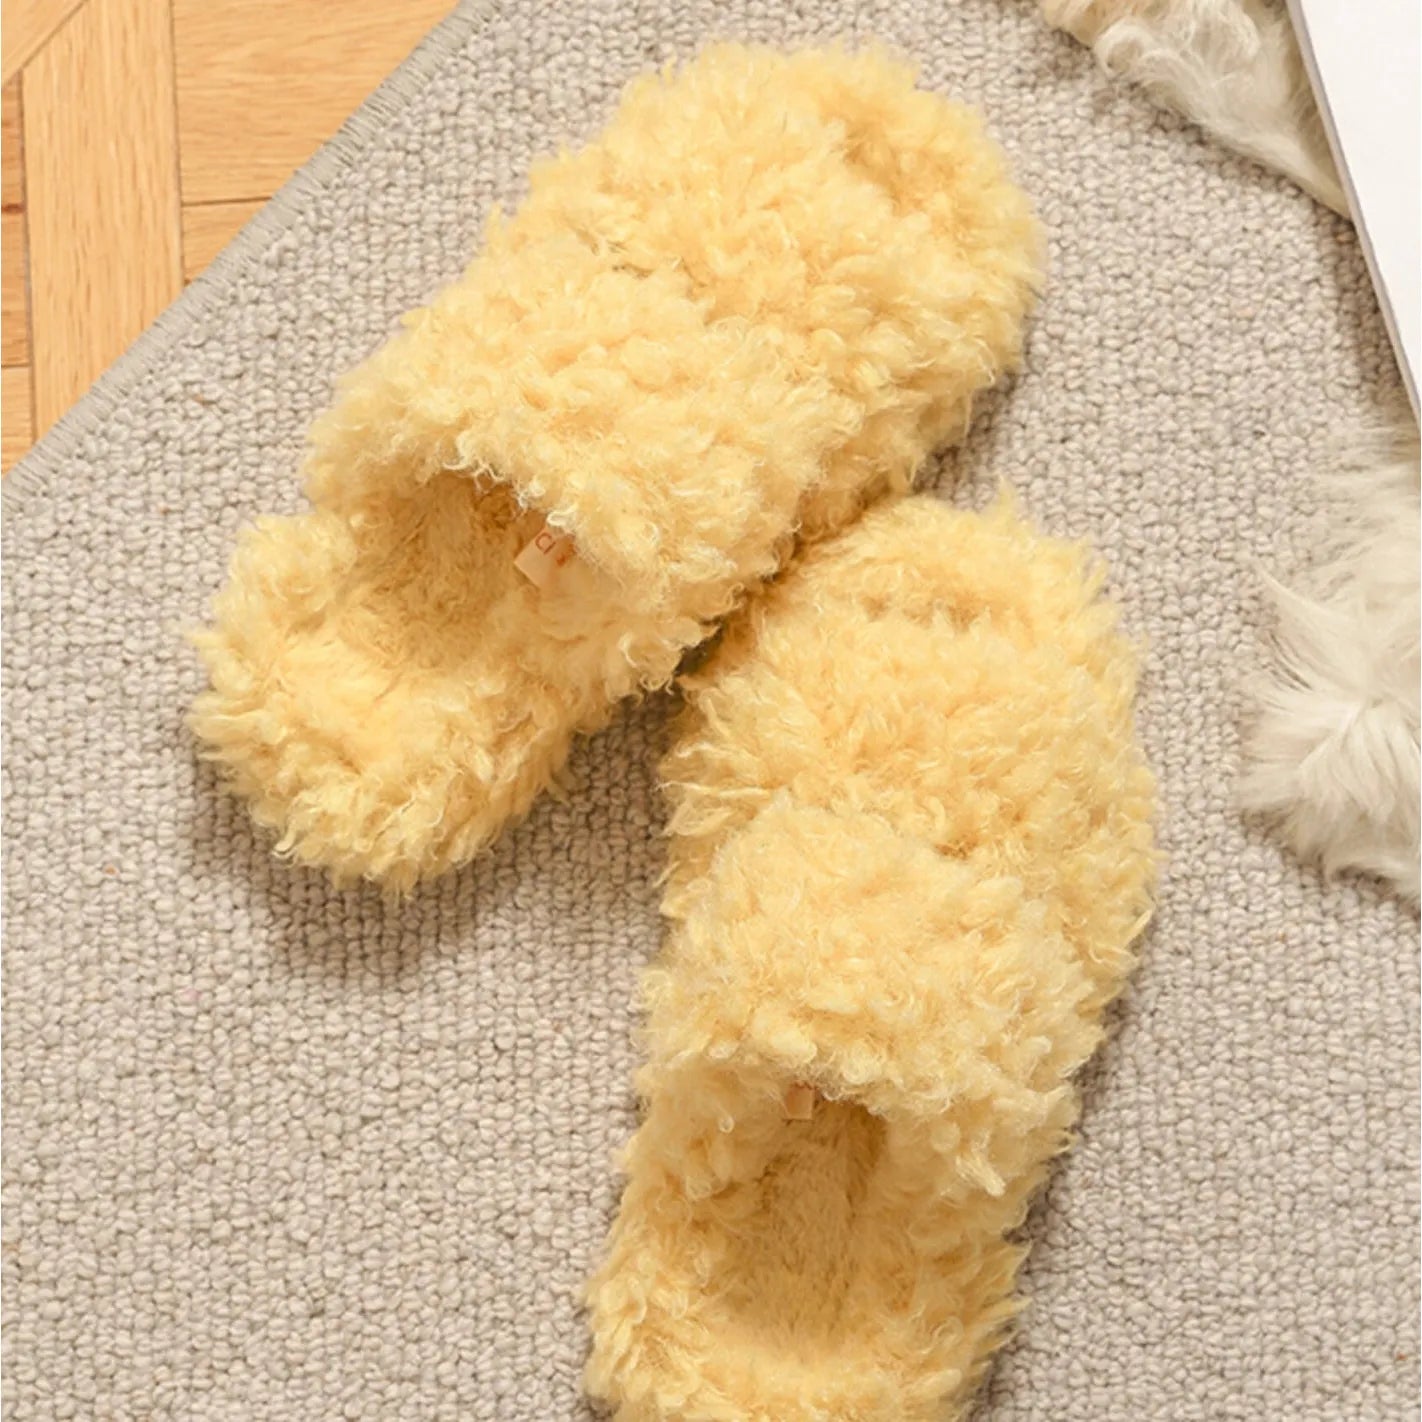 Home Furry Slippers Women Fur Slides Fluffy Slippers platform House Slippers  Winter Shoes Indoor Woman Shoes Fur Slippers